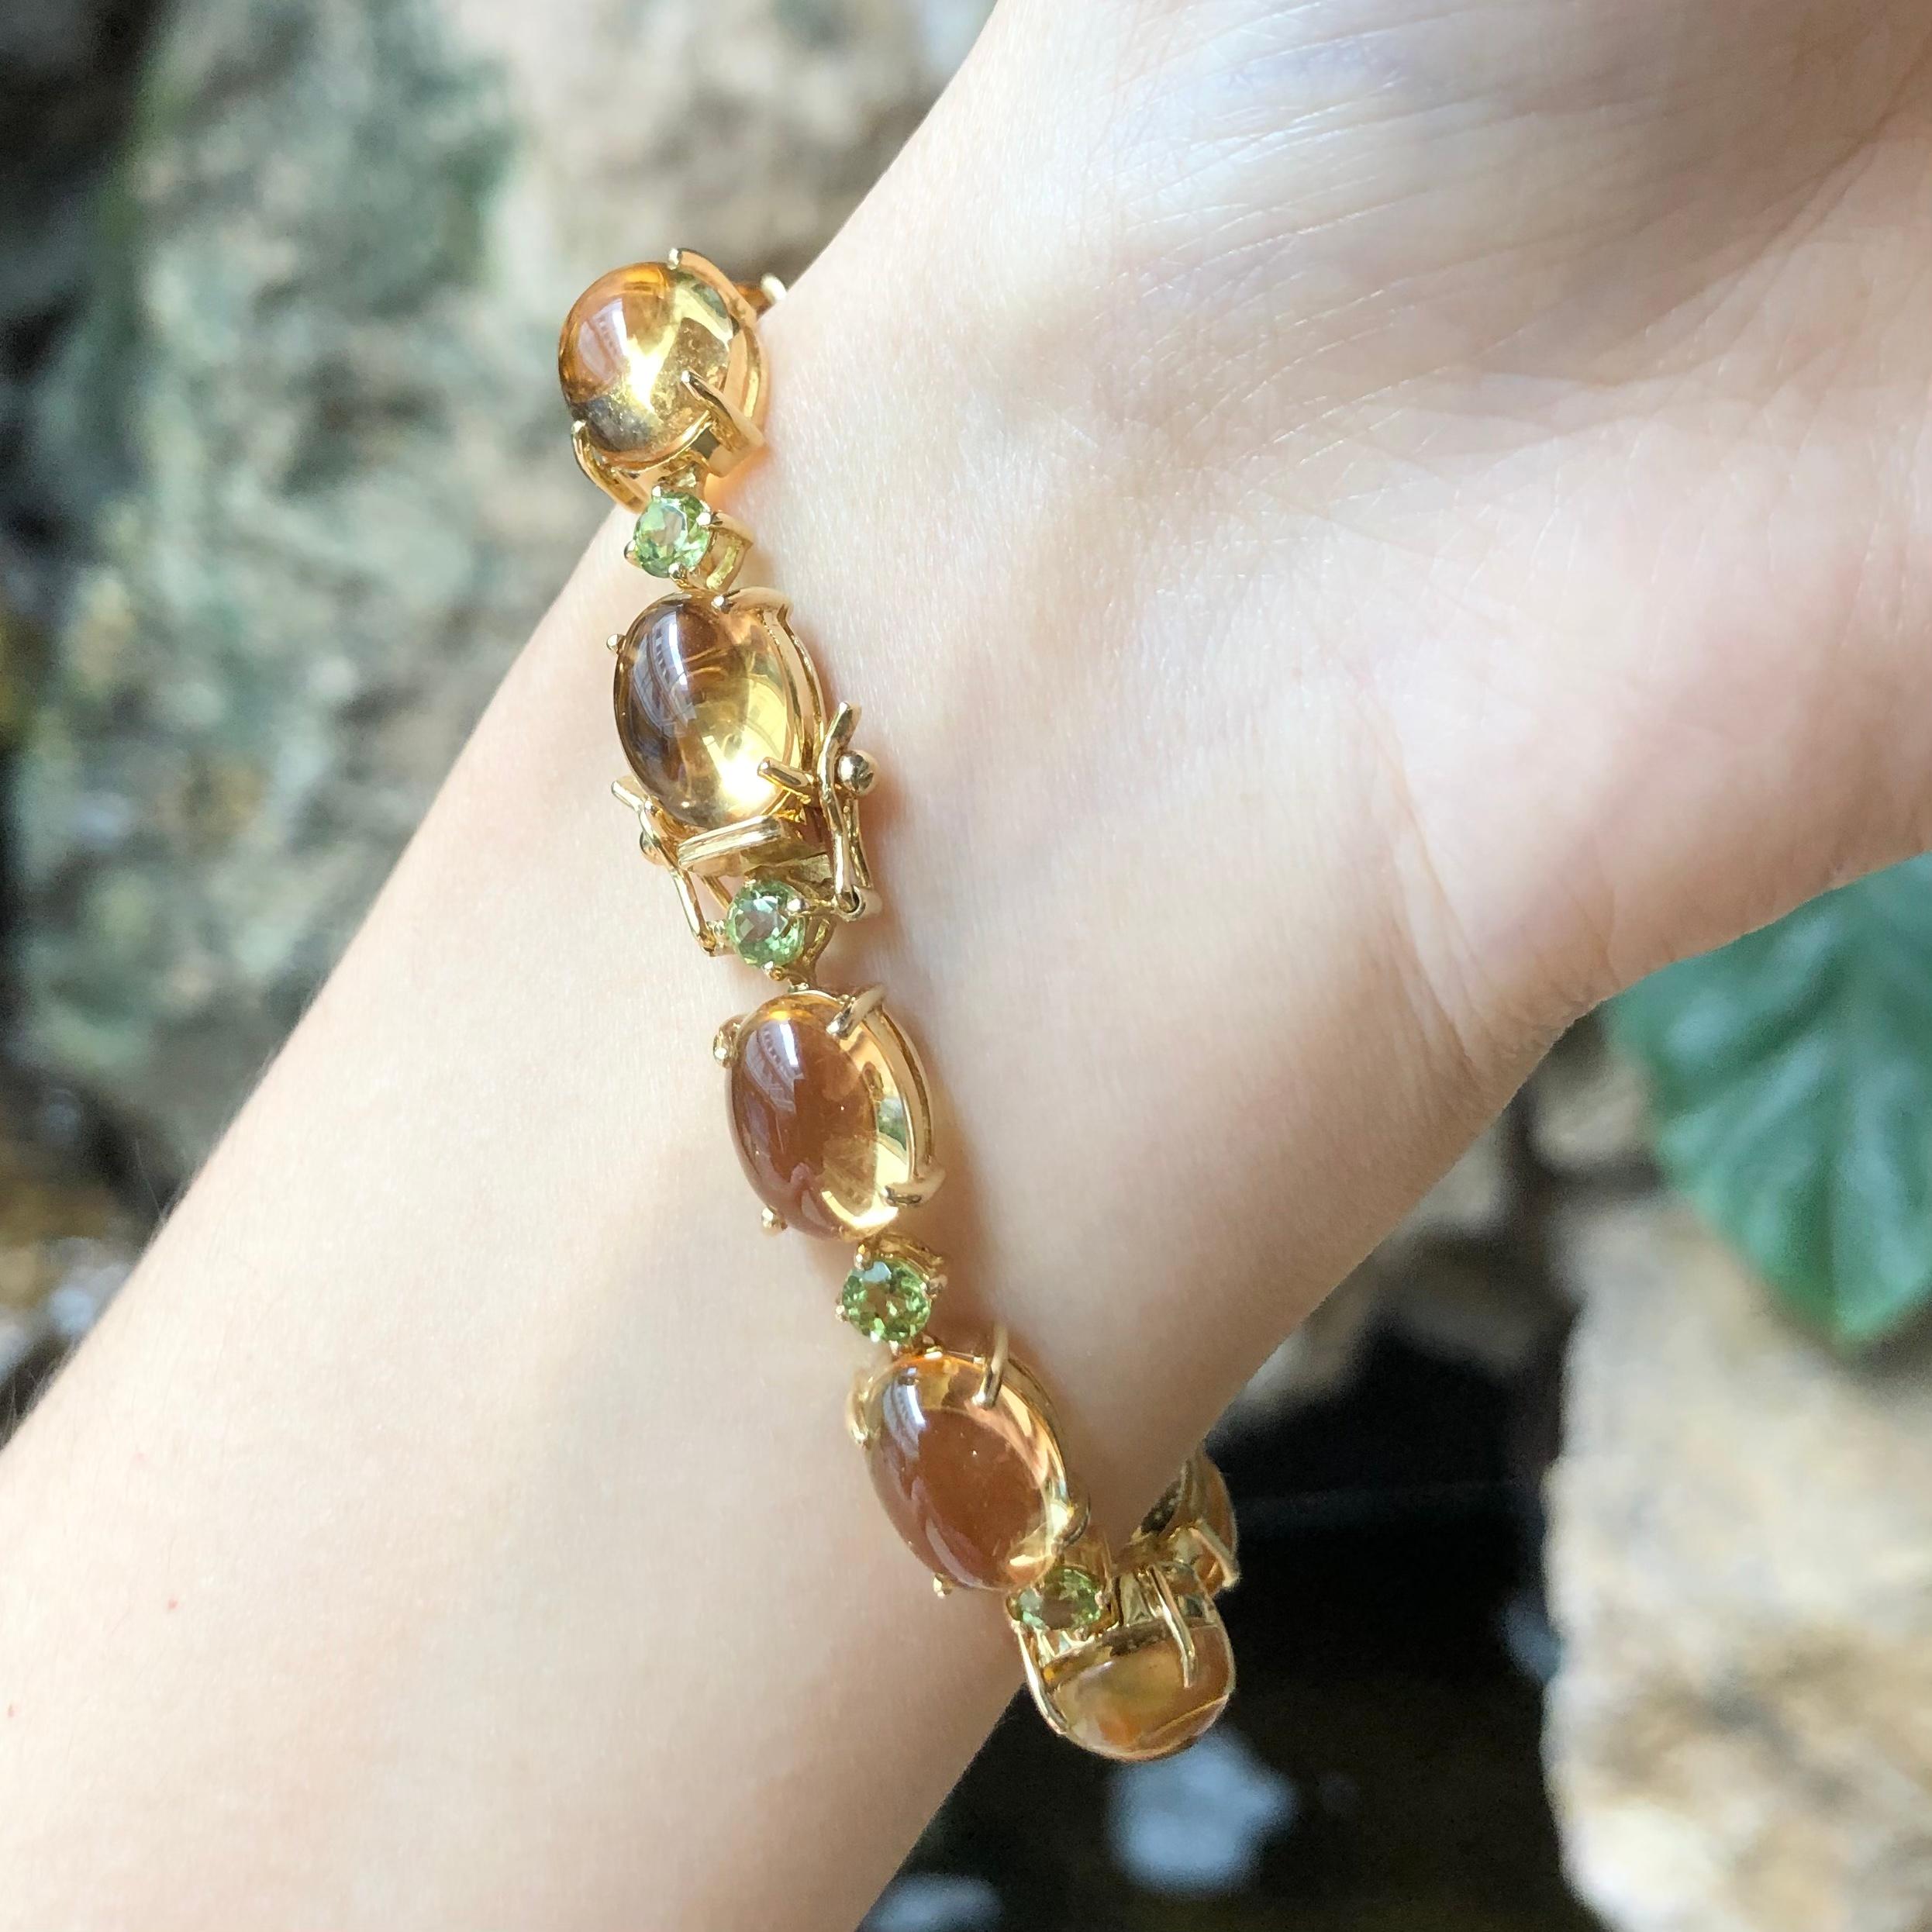 Cabochon Citrine 42.92 carats with Peridot 2.99 carats Bracelet set in 18 Karat Gold Settings

Width:  0.9 cm 
Length: 17.0 cm
Total Weight: 26.59 grams

